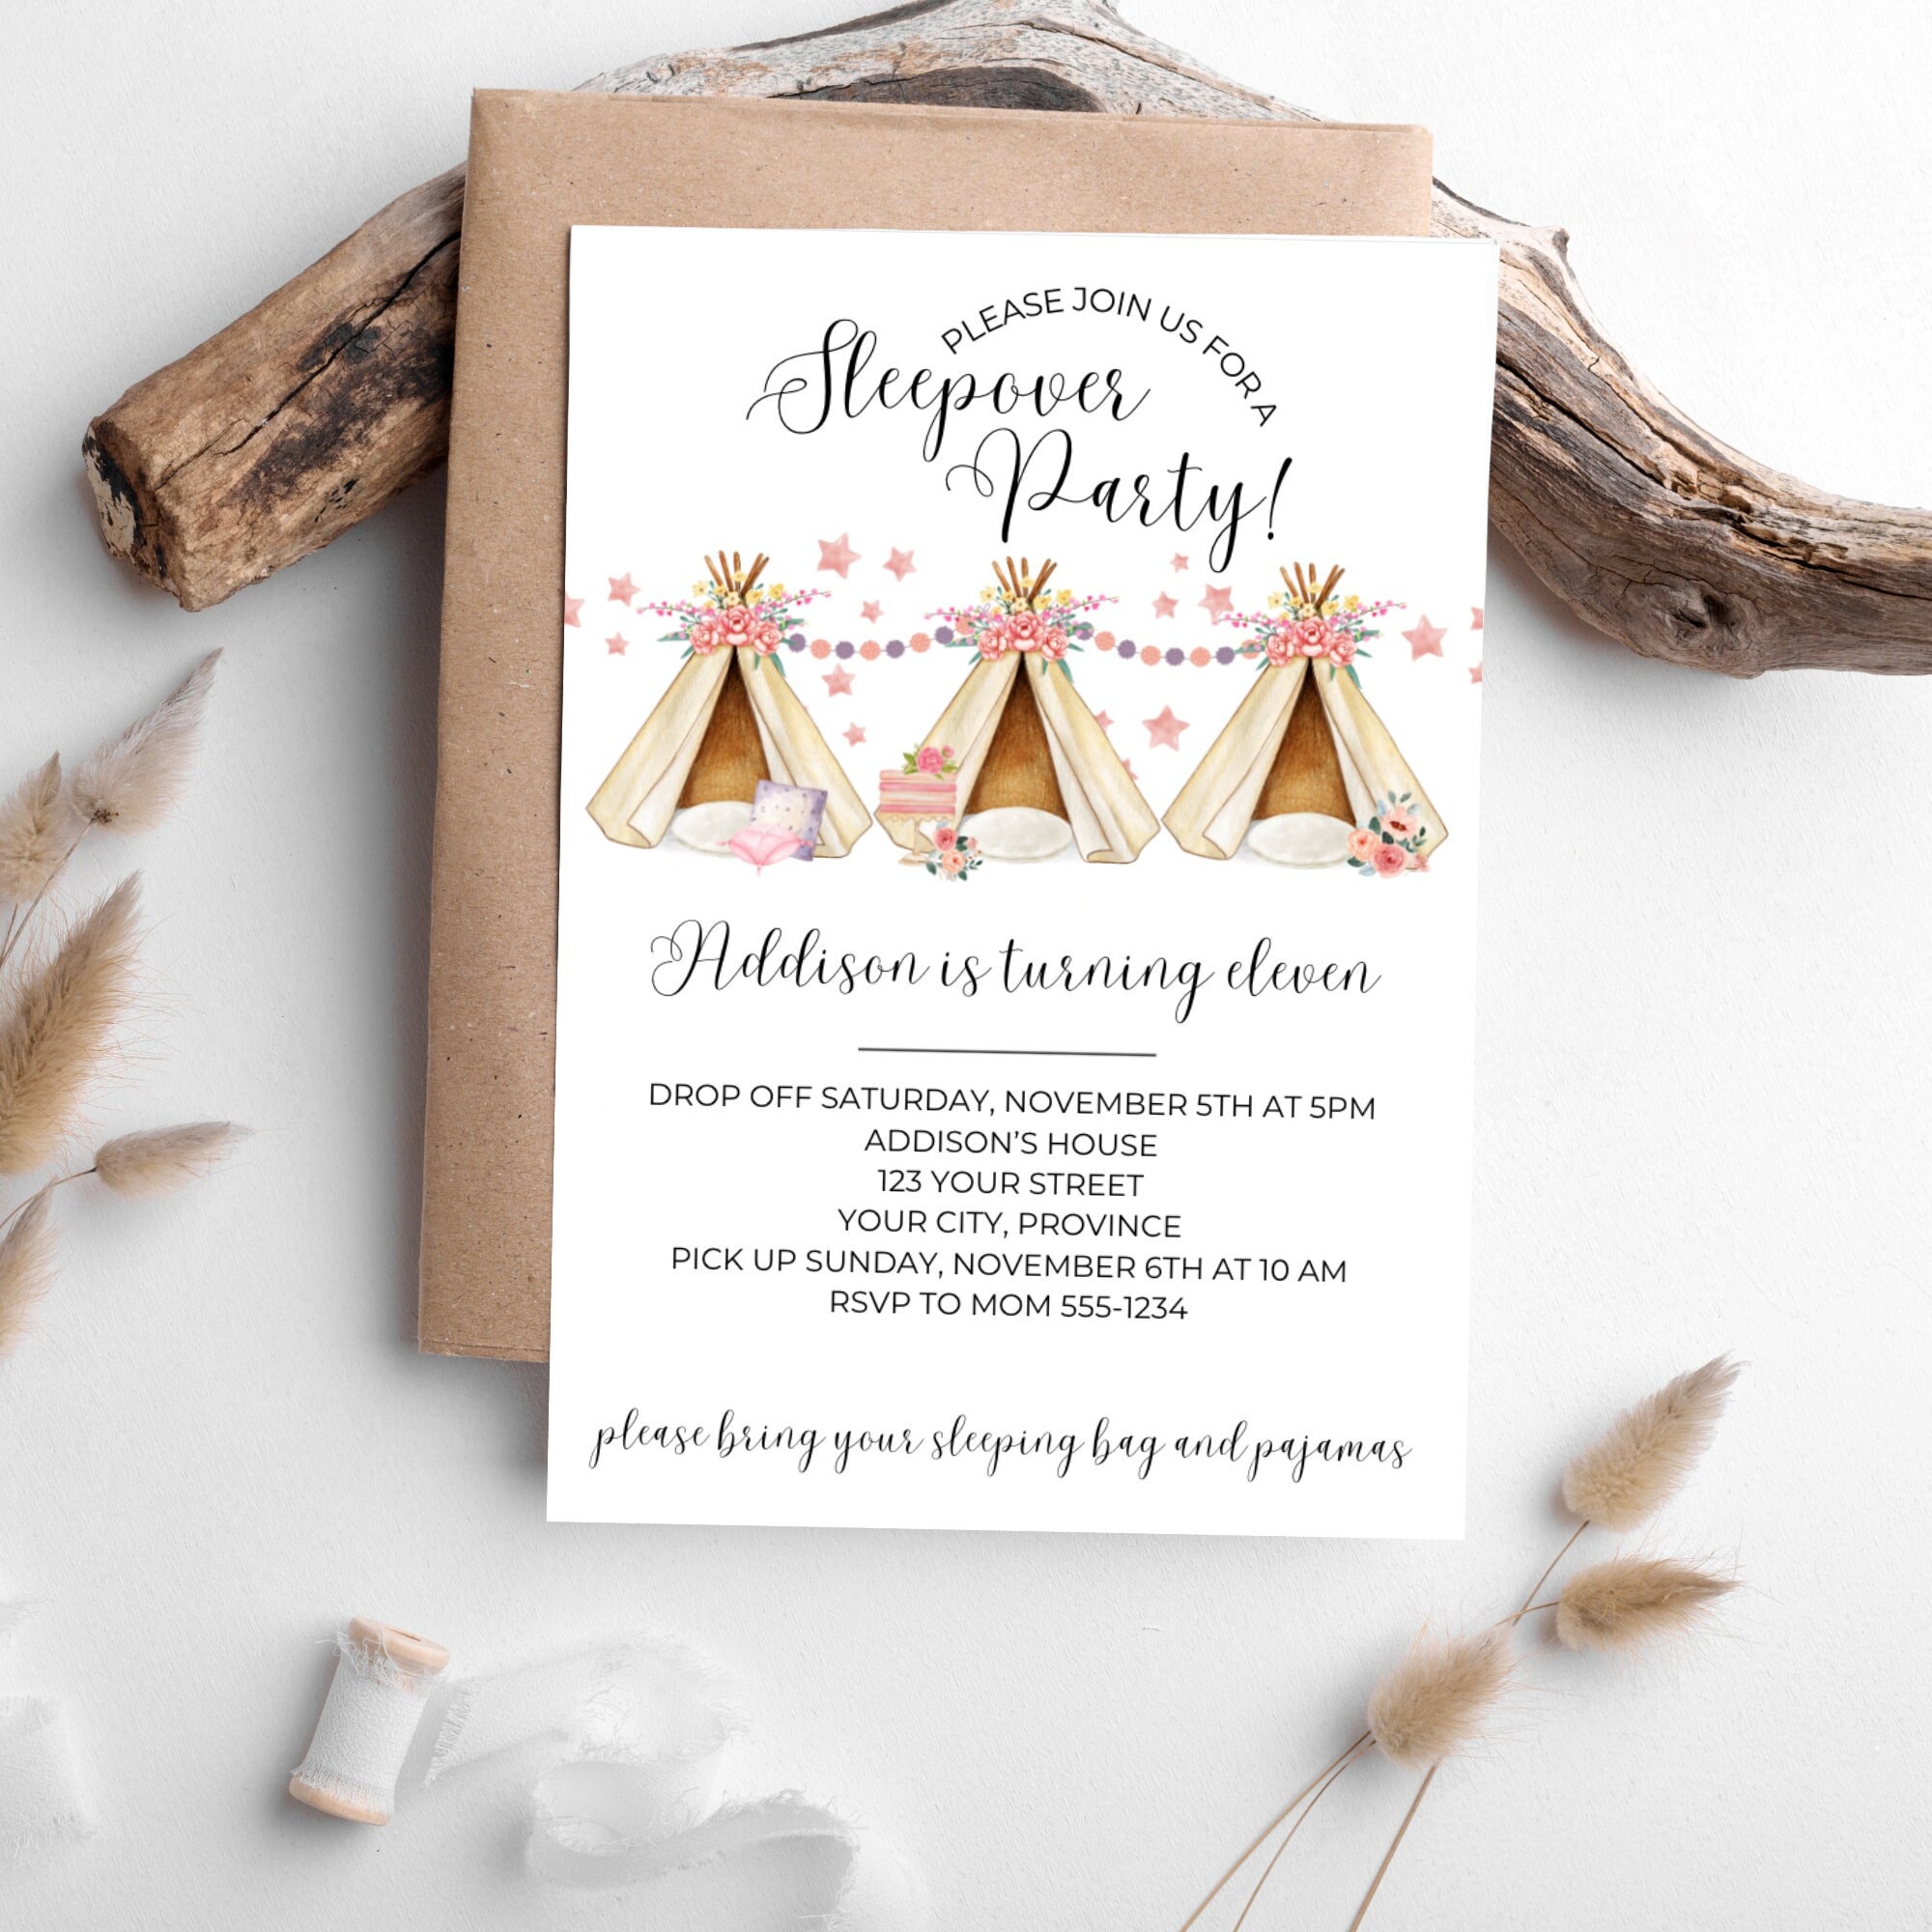 Tee Pee Mint Peach Pink Baby Shower Tribal Boho Invitation. Digital Files.  Feathers, Aqua, Tipi, Antlers, Arrows. Customised by Me. 153CMP 